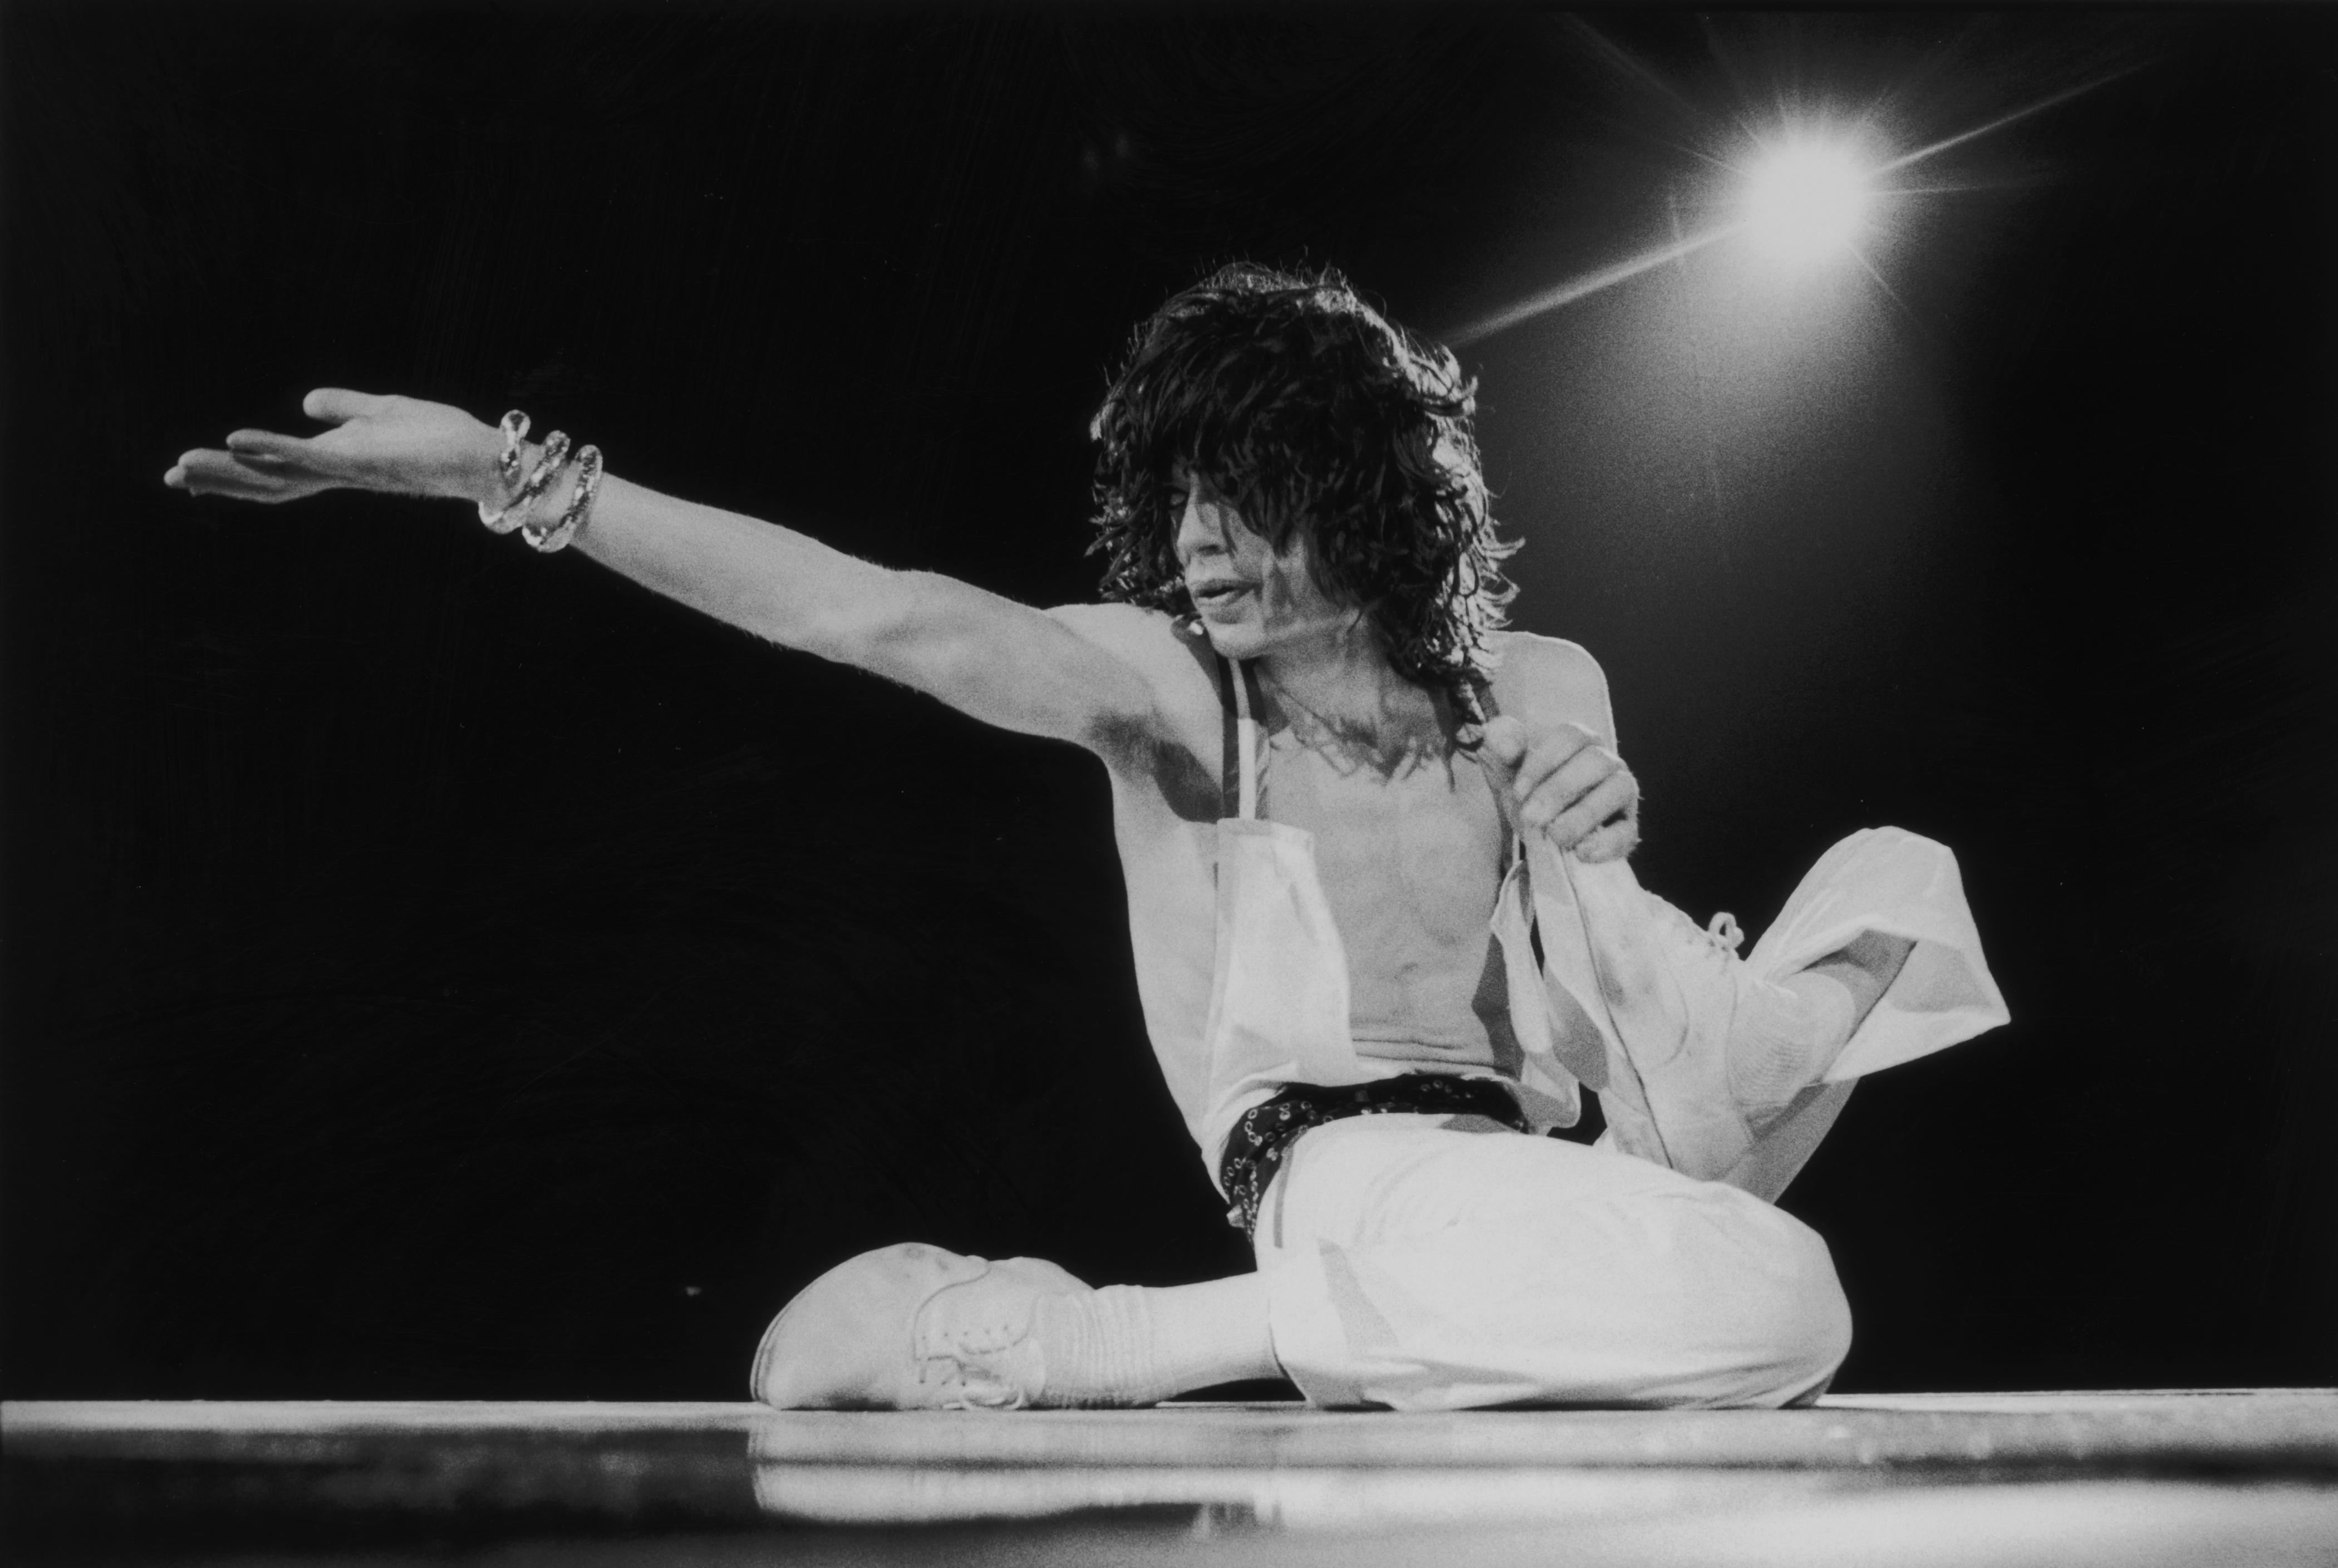 Christopher Simon Sykes Black and White Photograph - "Contortionist" Rolling Stones 1975 Tour, SIGNED, Limited Edition